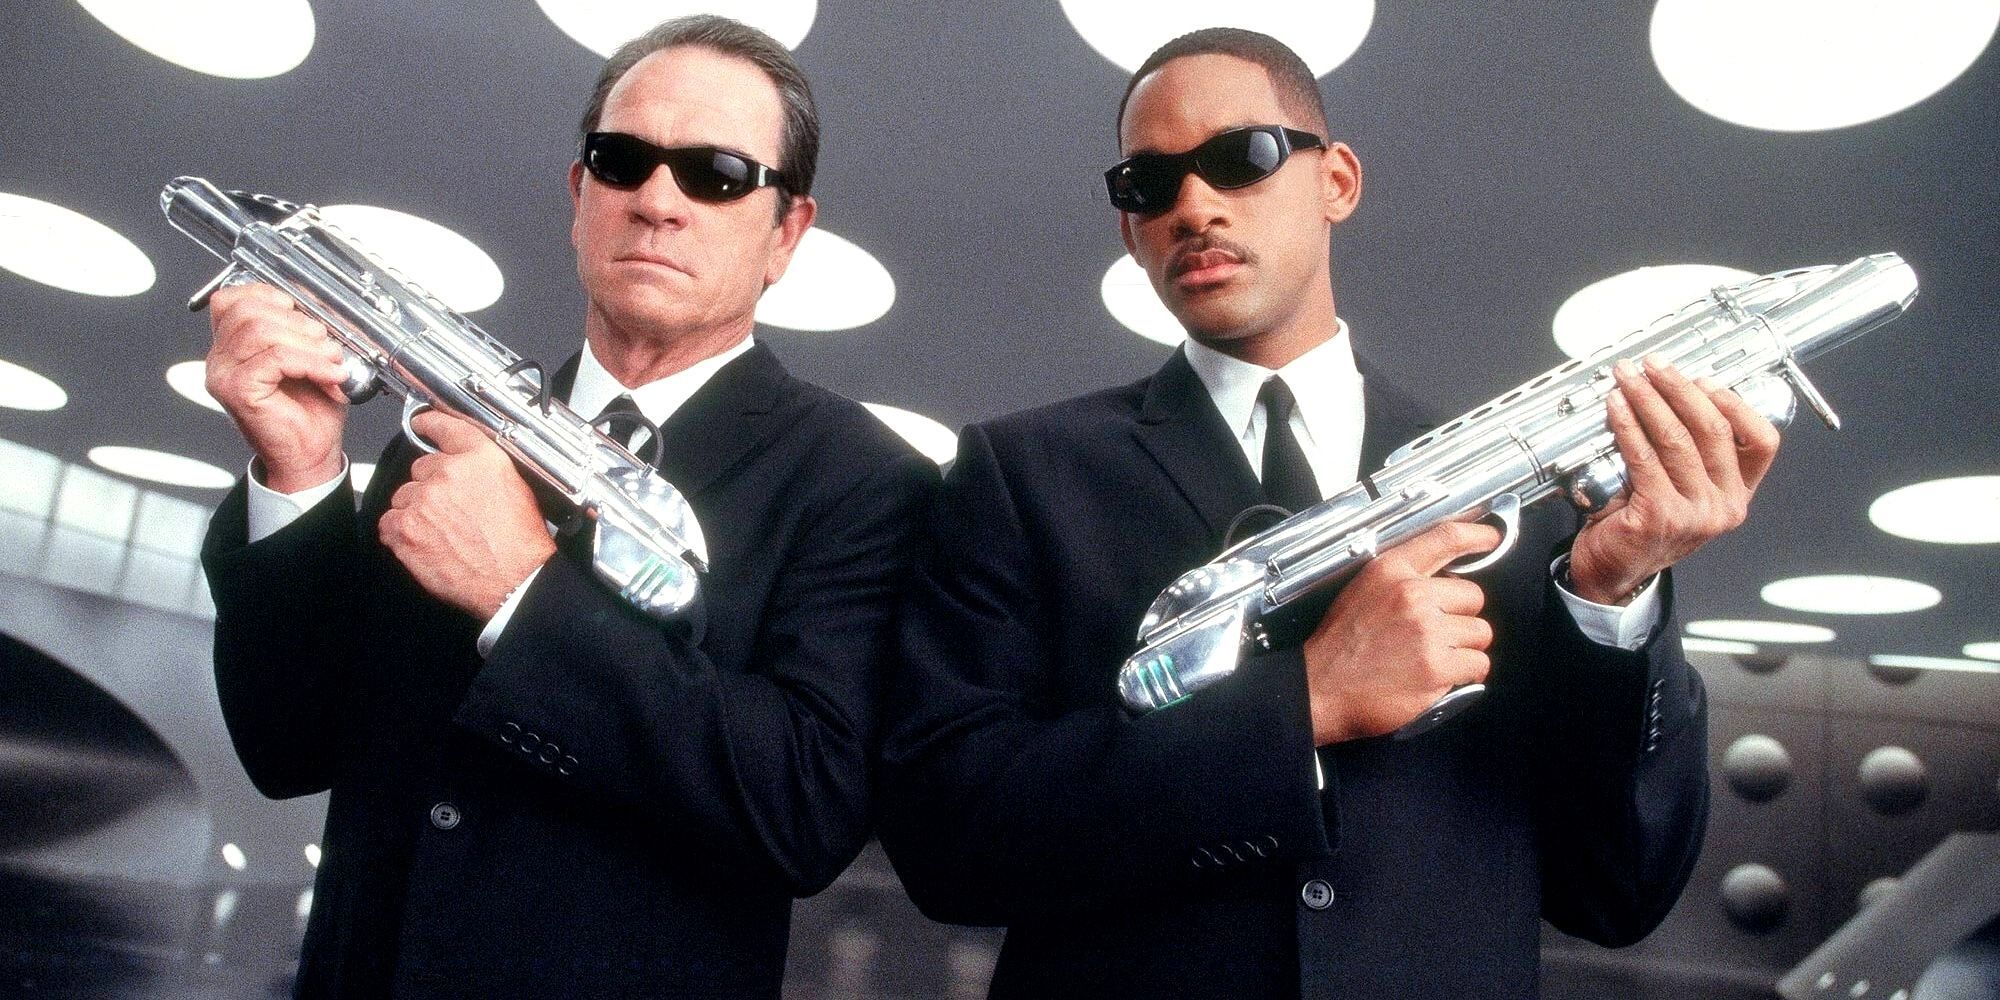 Men In Black Agent K and J Wearing Sunglasses And Holding Special Blaster Weapons